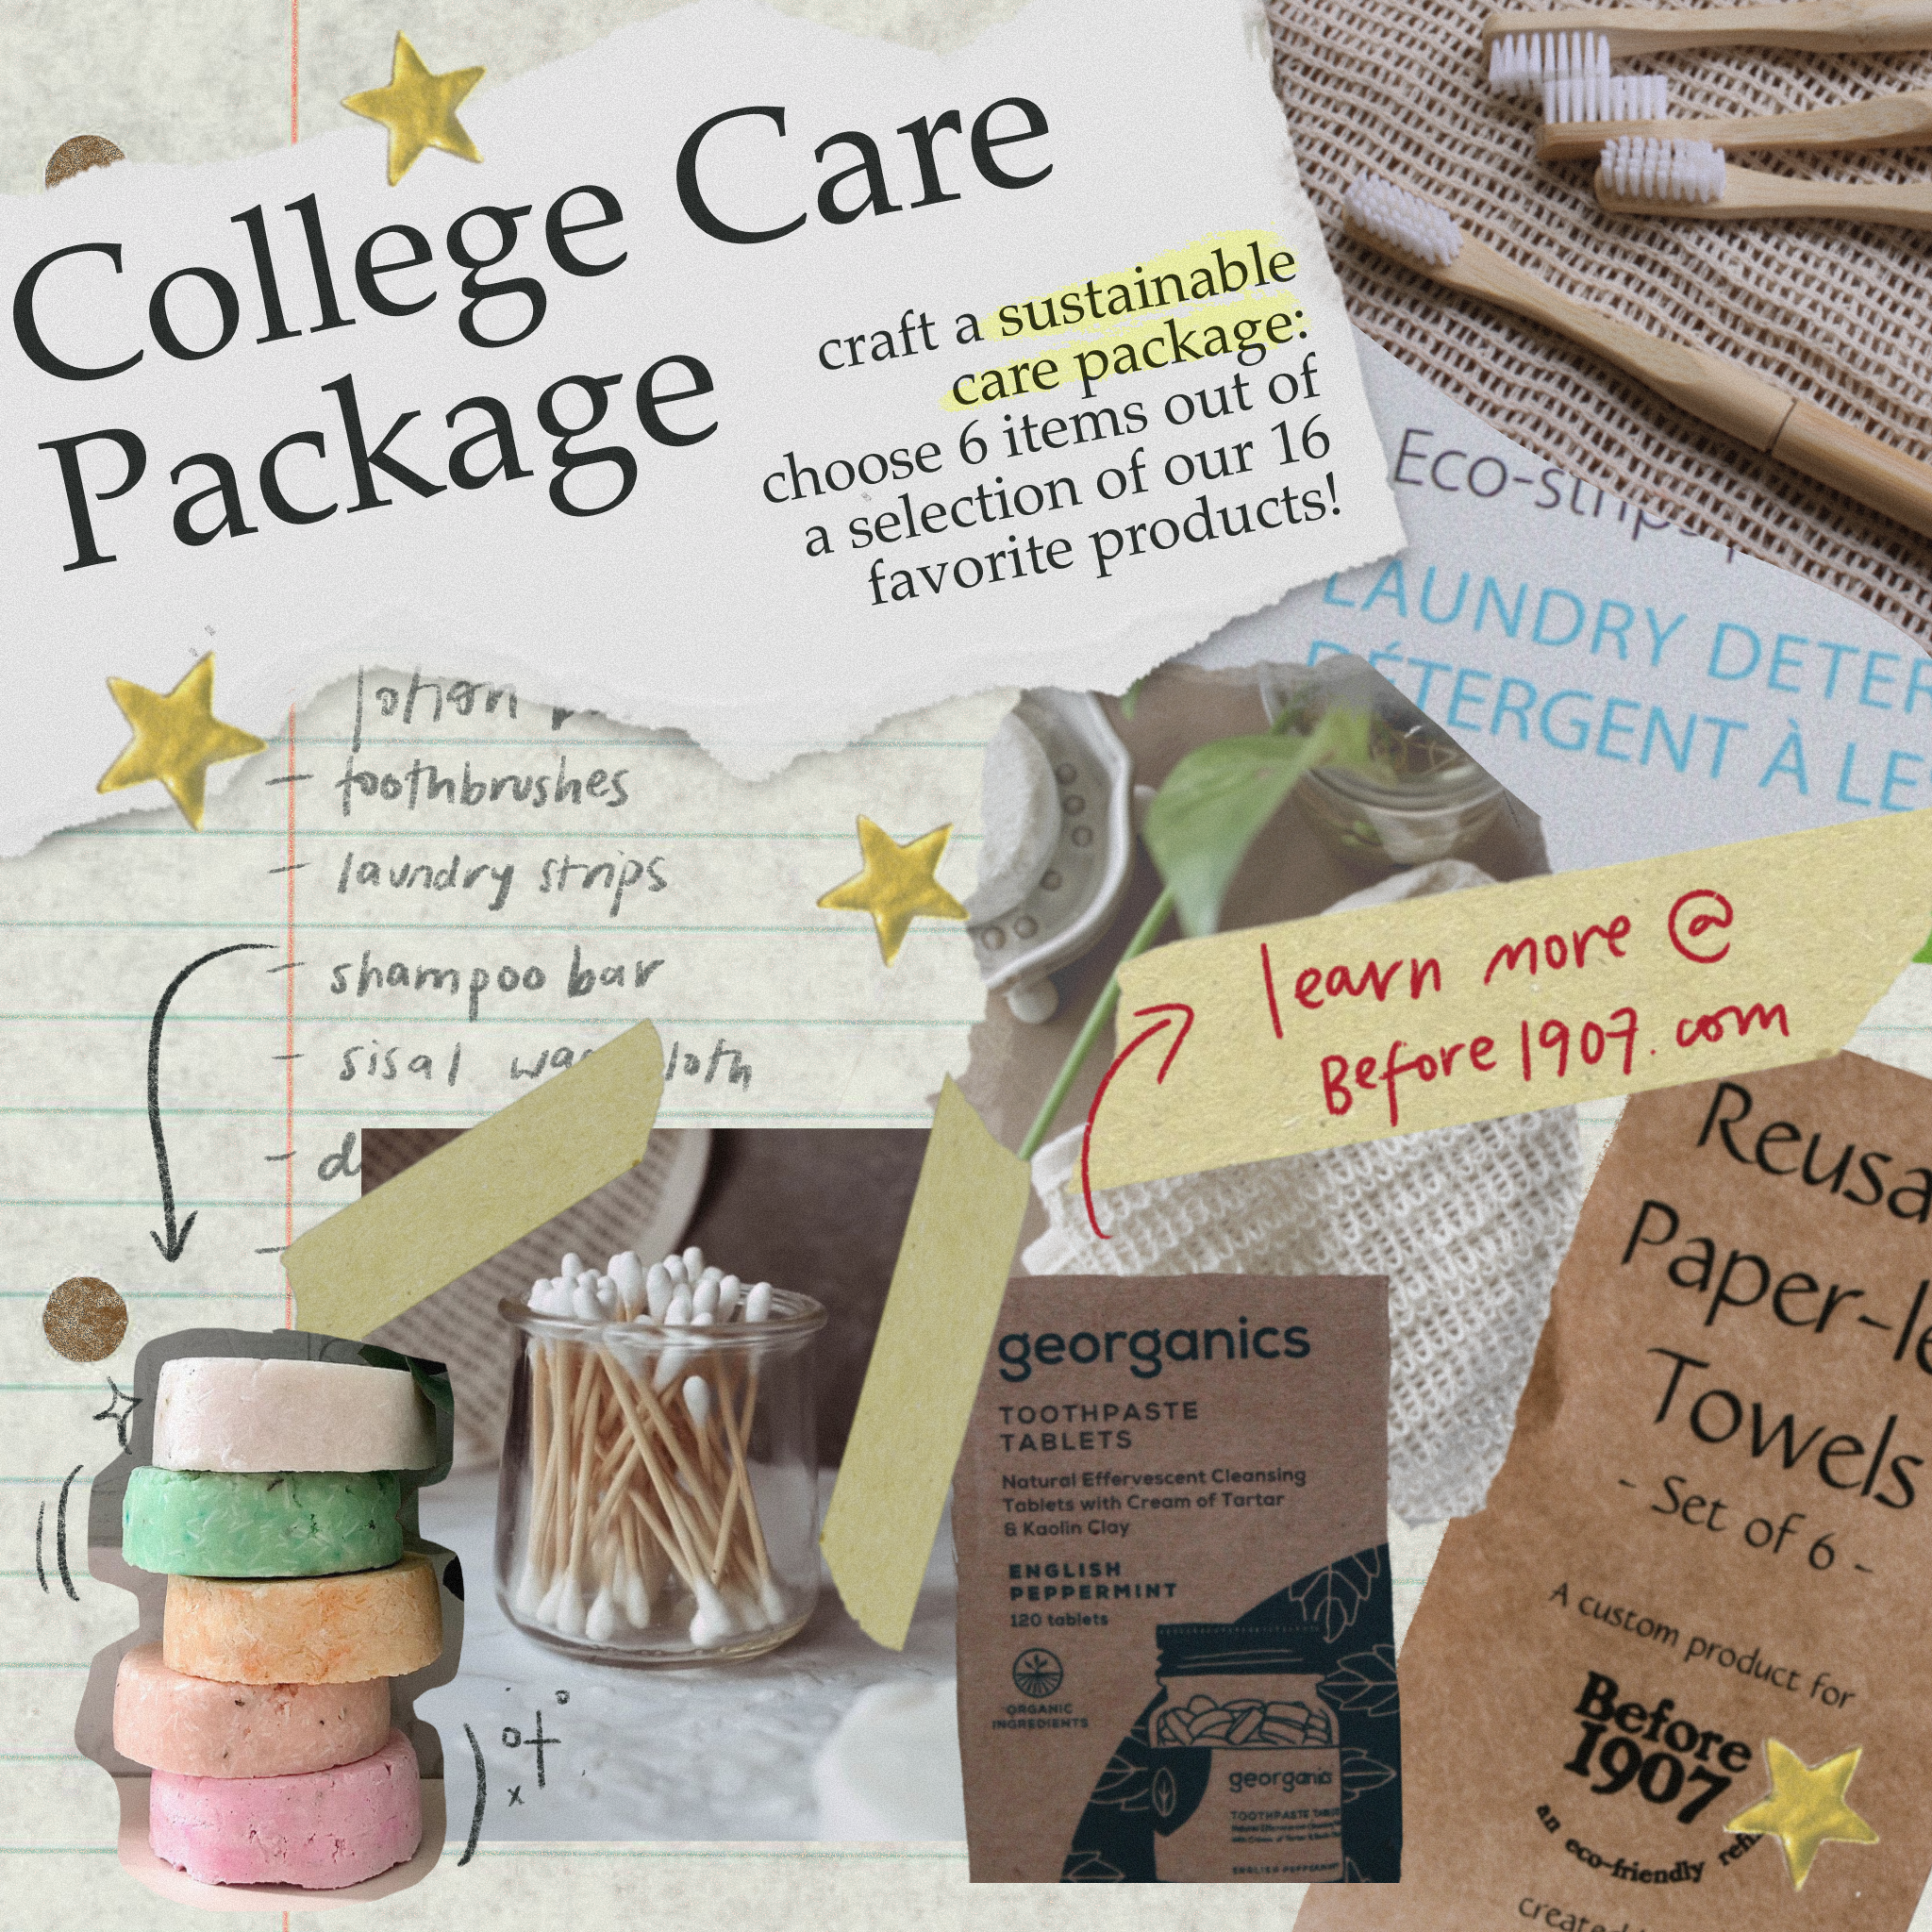 College Care Package (5 products)